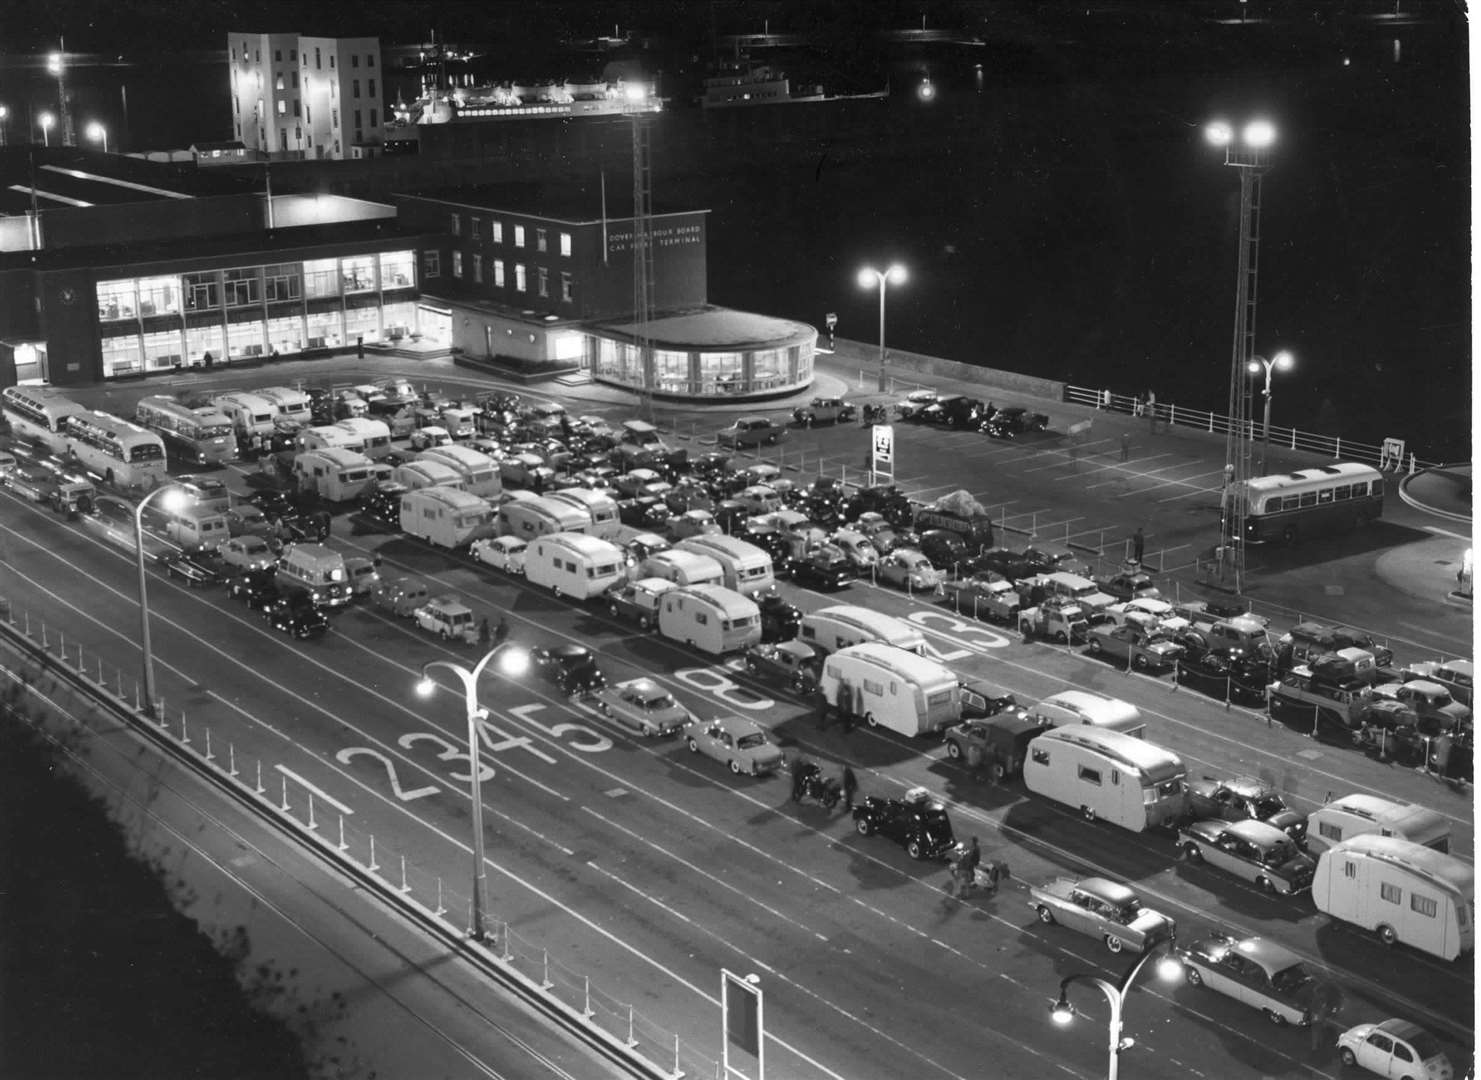 Queues at the Port of Dover 60 years ago this month, with cars and caravans pictured waiting to board ferries in August. 1962. Picture: Ray Warner Ltd